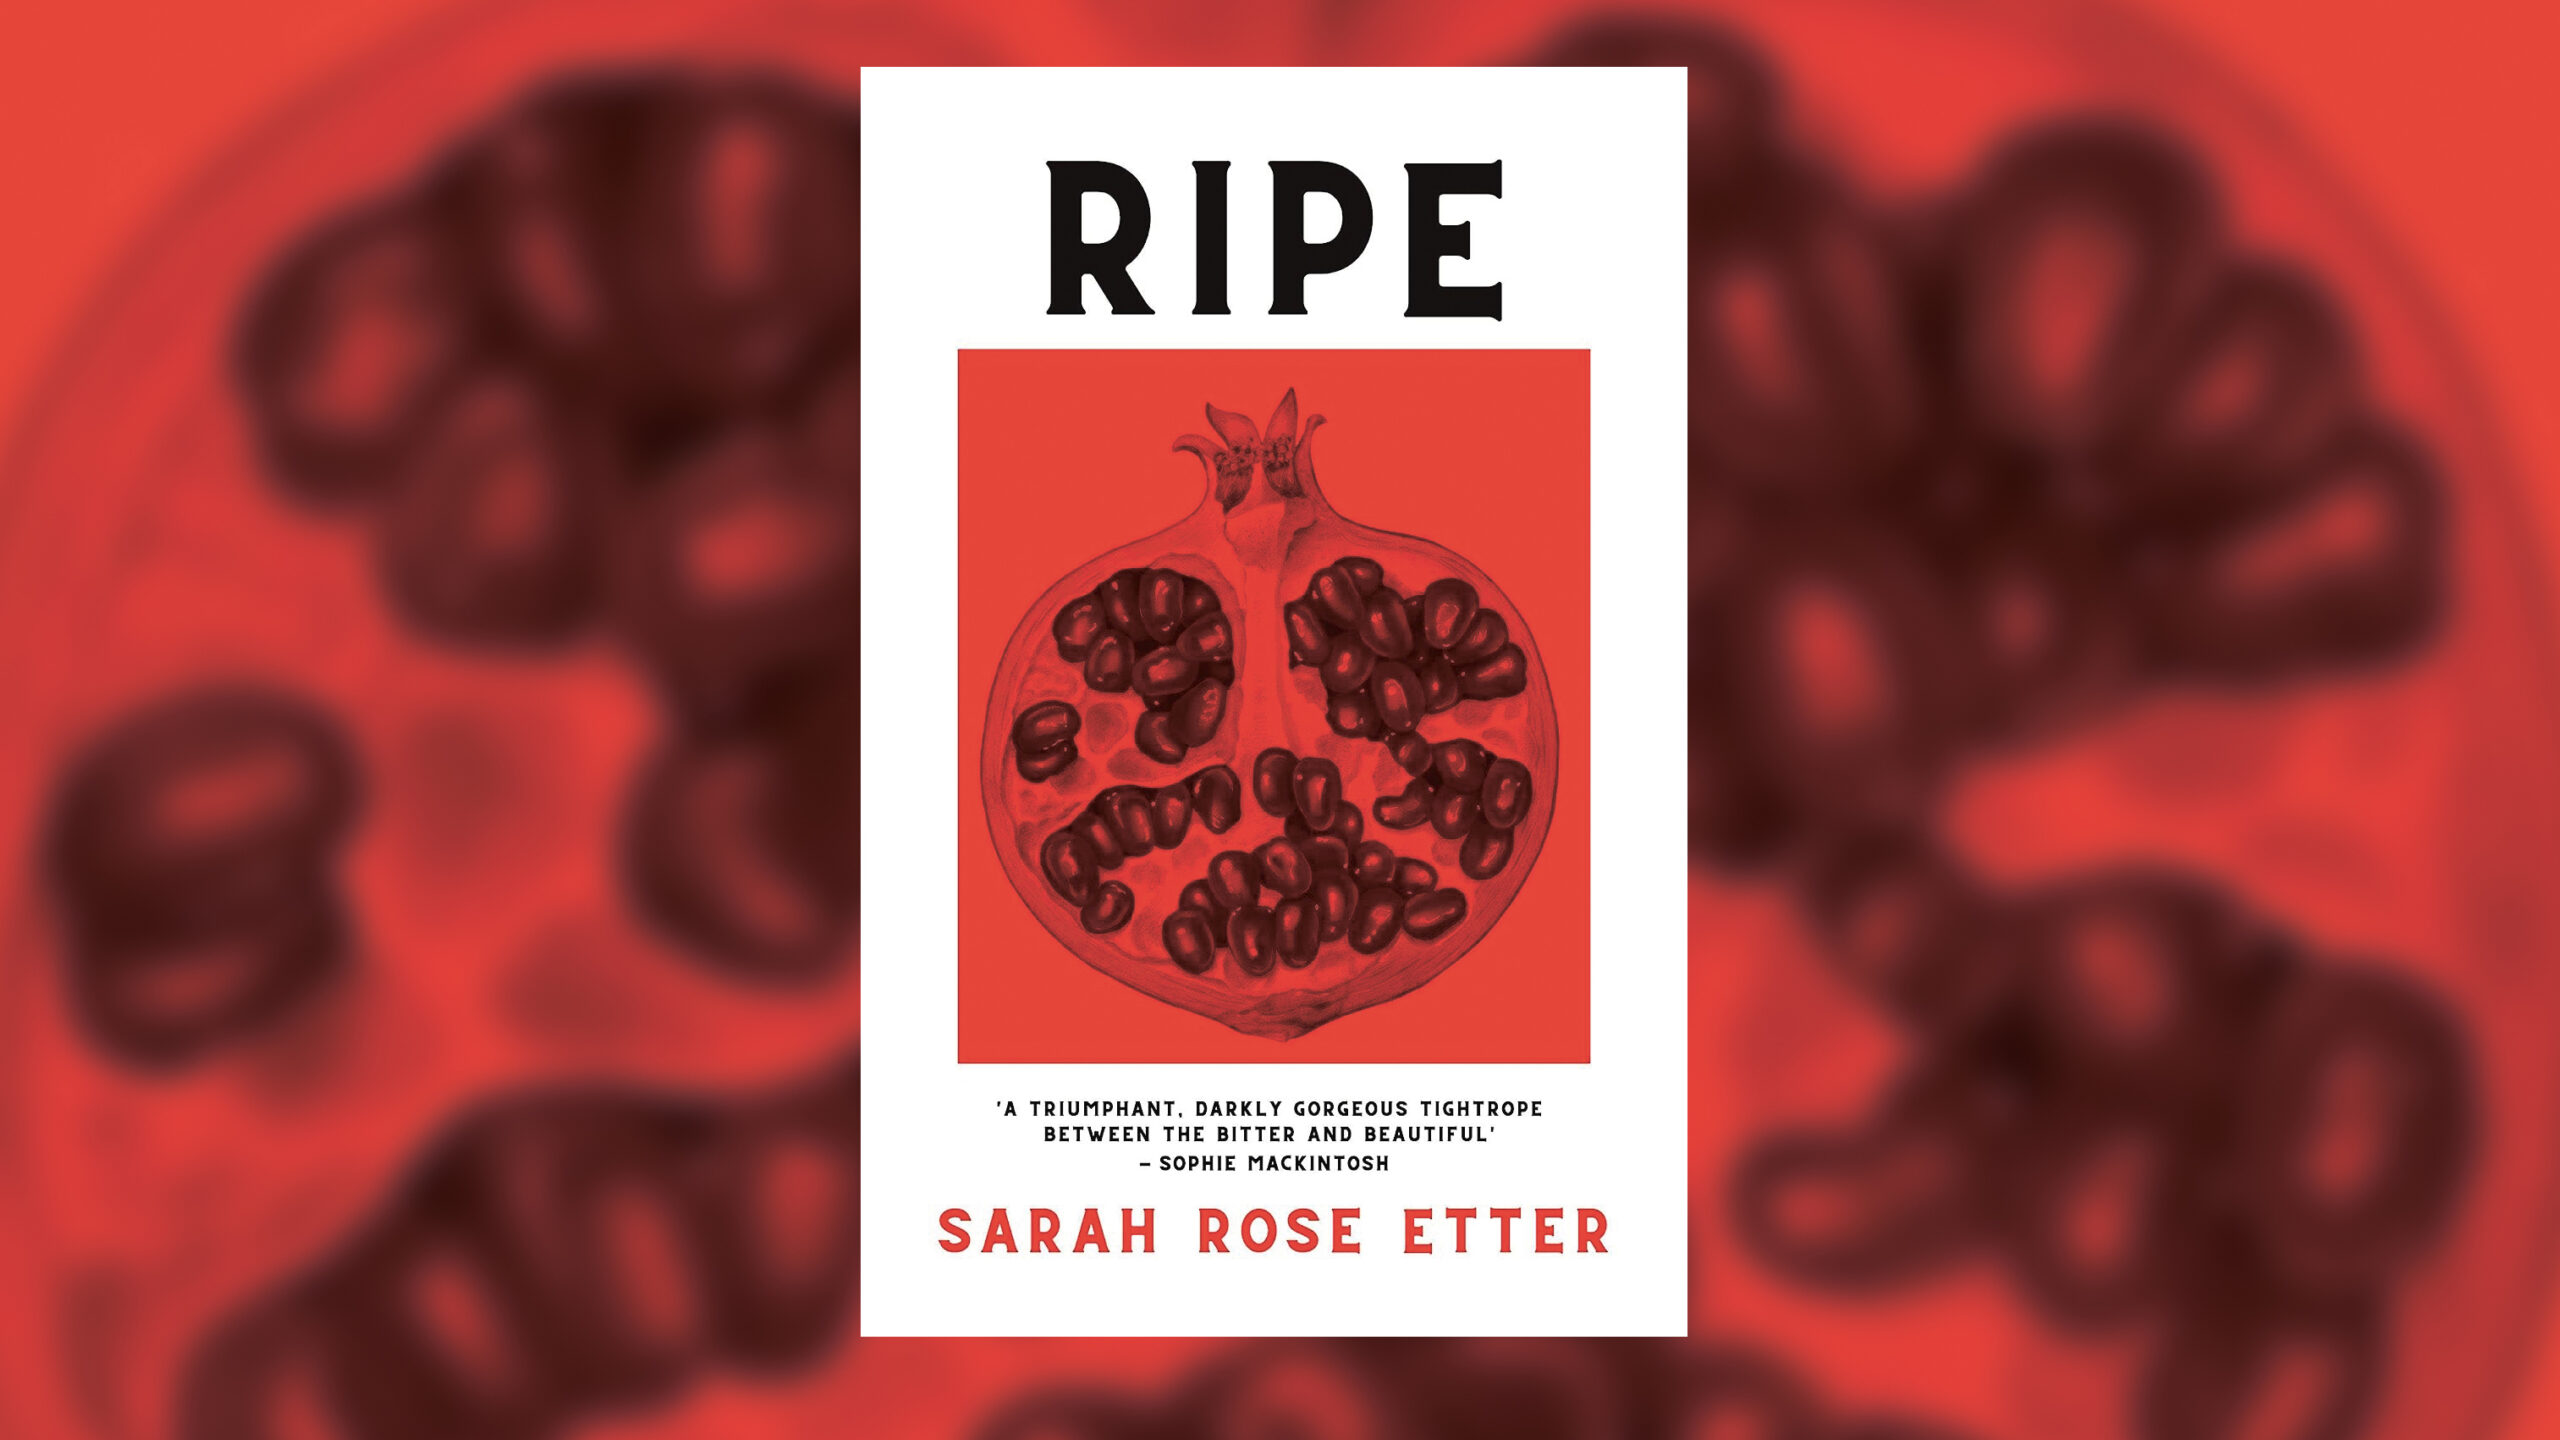 The cover of Ripe by Sarah Rose Etter features an image of a halved pomegranate